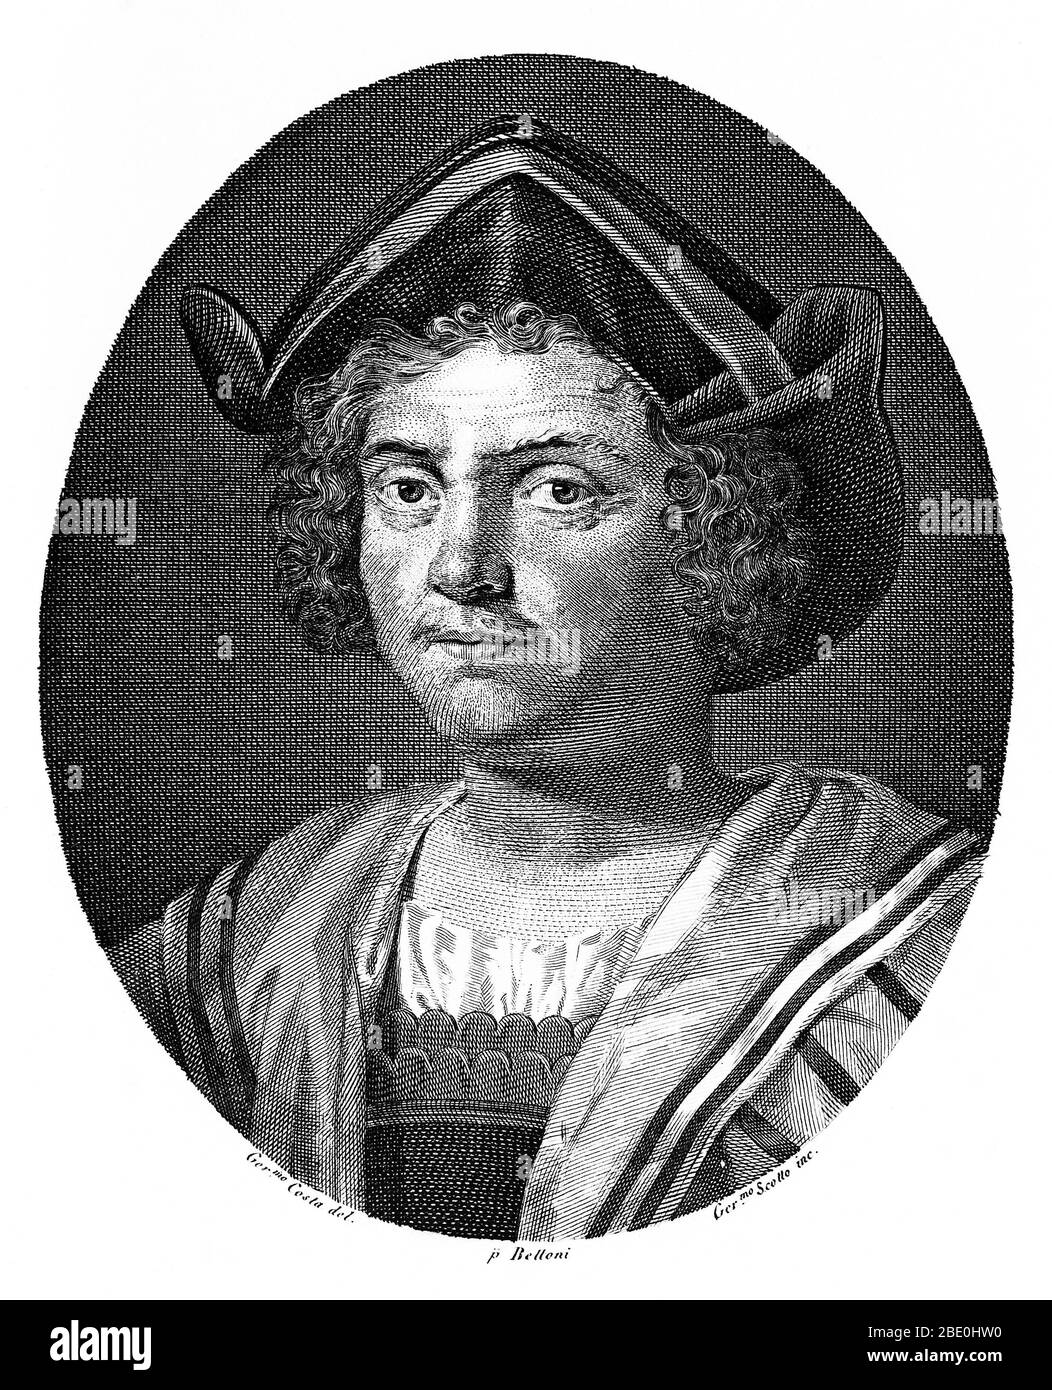 Portrait of Christopher Columbus published in 1844. Christopher Columbus (October 30 or 31, 1451 - May 20, 1506) was an Italian explorer, colonizer, and navigator. He completed four voyages across the Atlantic Ocean that led to European awareness of the American continents. During his first voyage in 1492, instead of reaching Japan, he landed in the Bahamas archipelago, which he named San Salvador. Over the course of three more voyages, he visited the Greater and Lesser Antilles, the Caribbean coast of Colombia and Venezuela, claiming them for the Spanish Empire. His efforts to establish perma Stock Photo